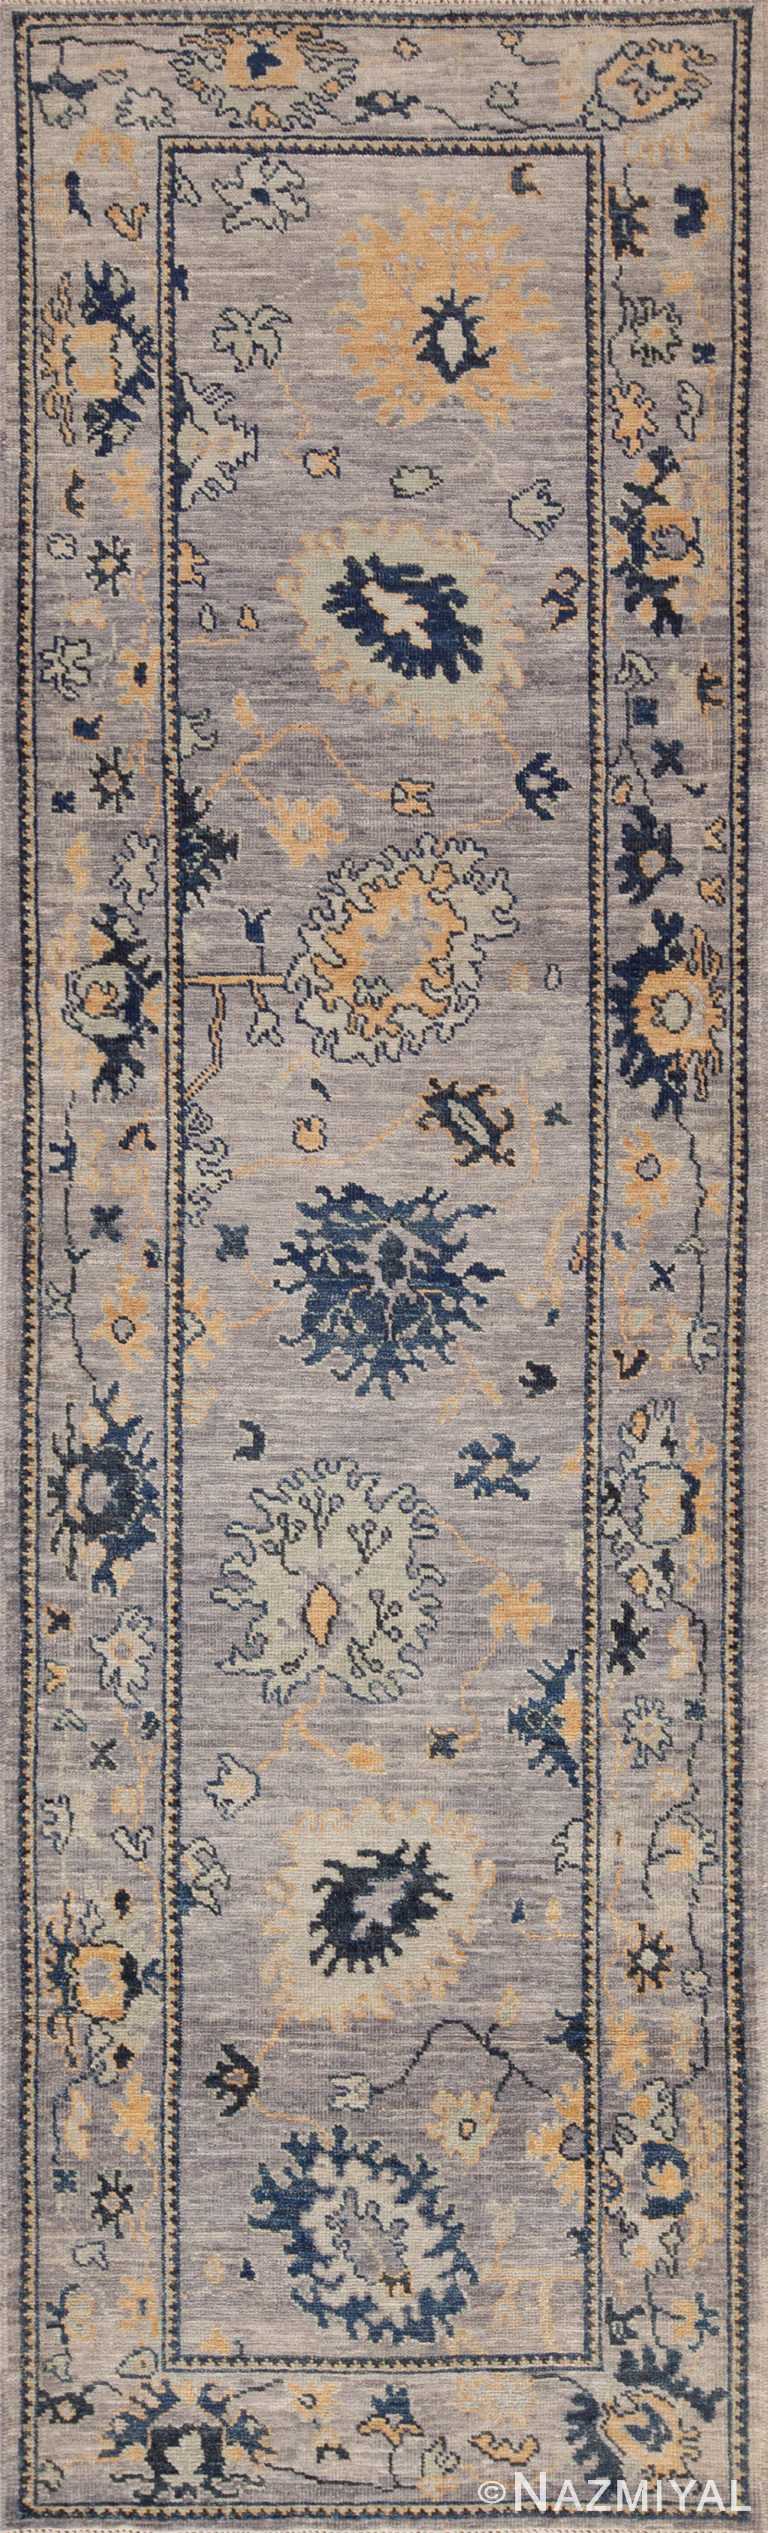 A Beautifully Decorative Soft Purple Pastel Color Modern Turkish Oushak- Design Contemporary Hallway Runner Rug 11211 by Nazmiyal Antique Rugs